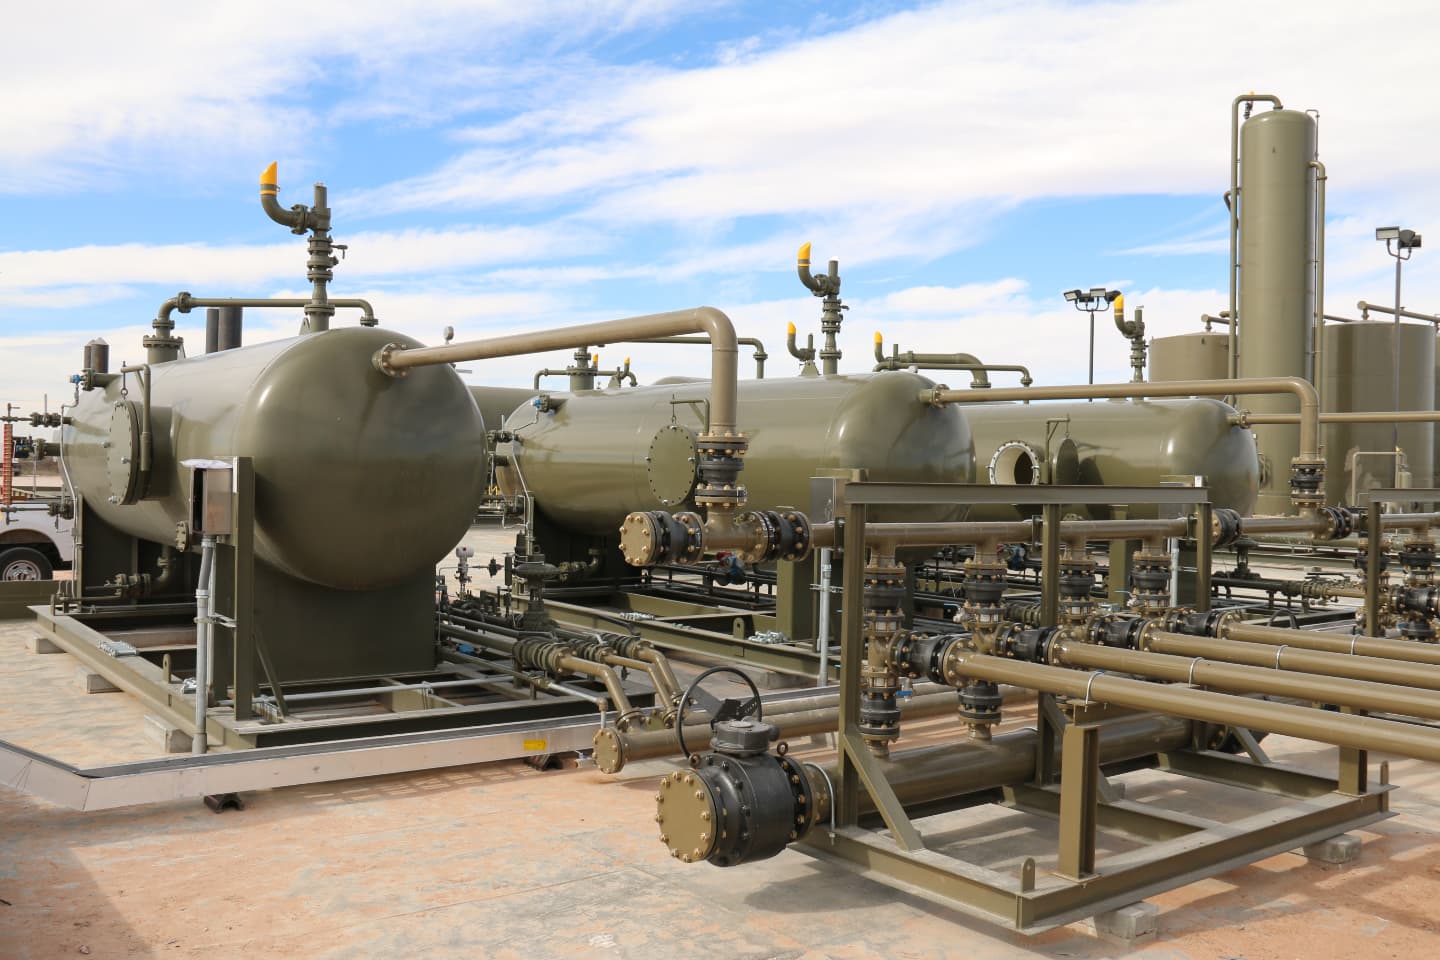 DNOW supplies all the pipe, valves, fittings, surface pumps, and ASME vessels and LACTs to accommodate your design and timeframe, whether you are building a single tank battery, or multiple tank batteries